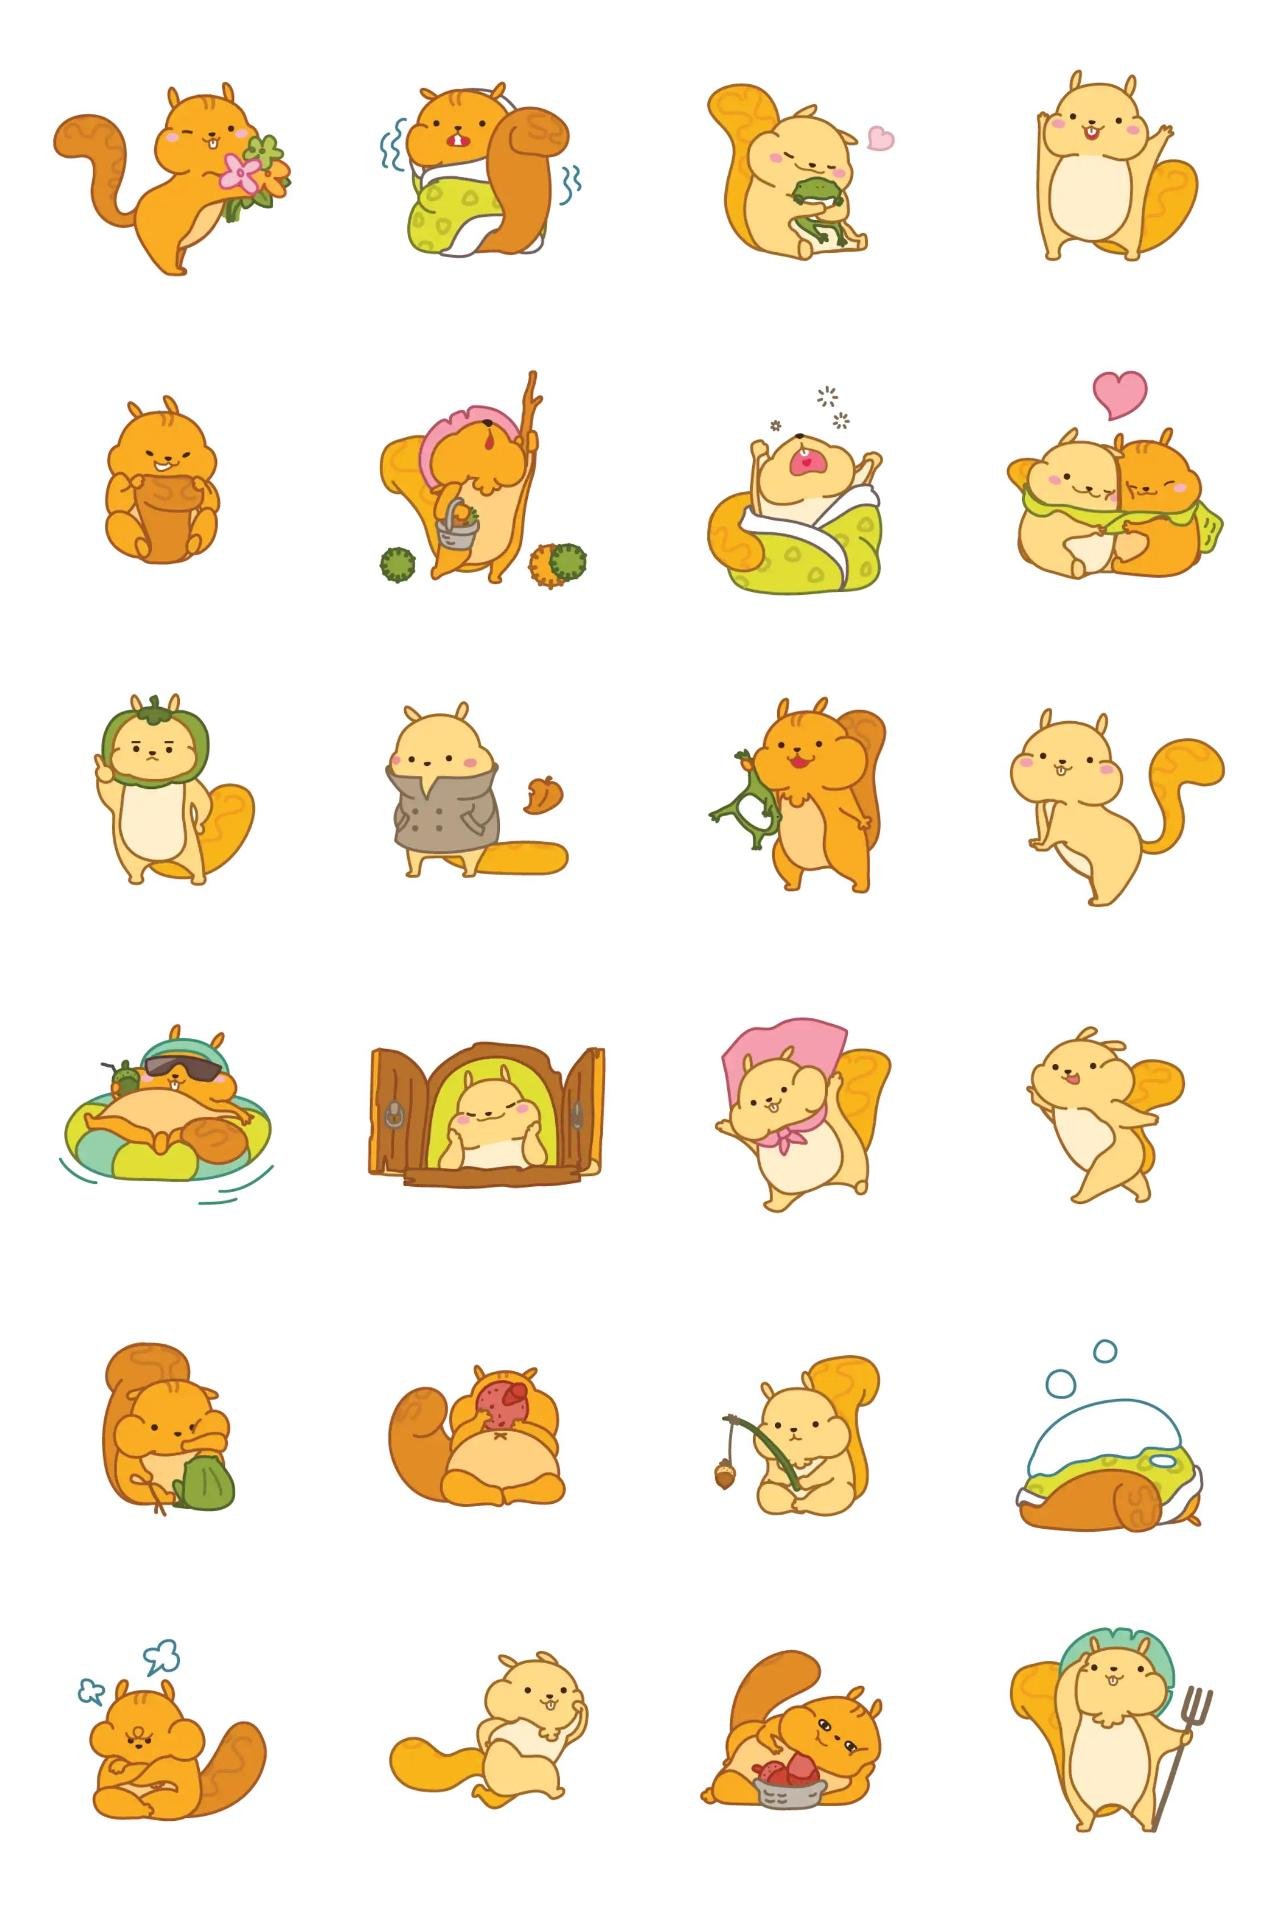 Lovely Chipmunk Animals,Romance sticker pack for Whatsapp, Telegram, Signal, and others chatting and message apps